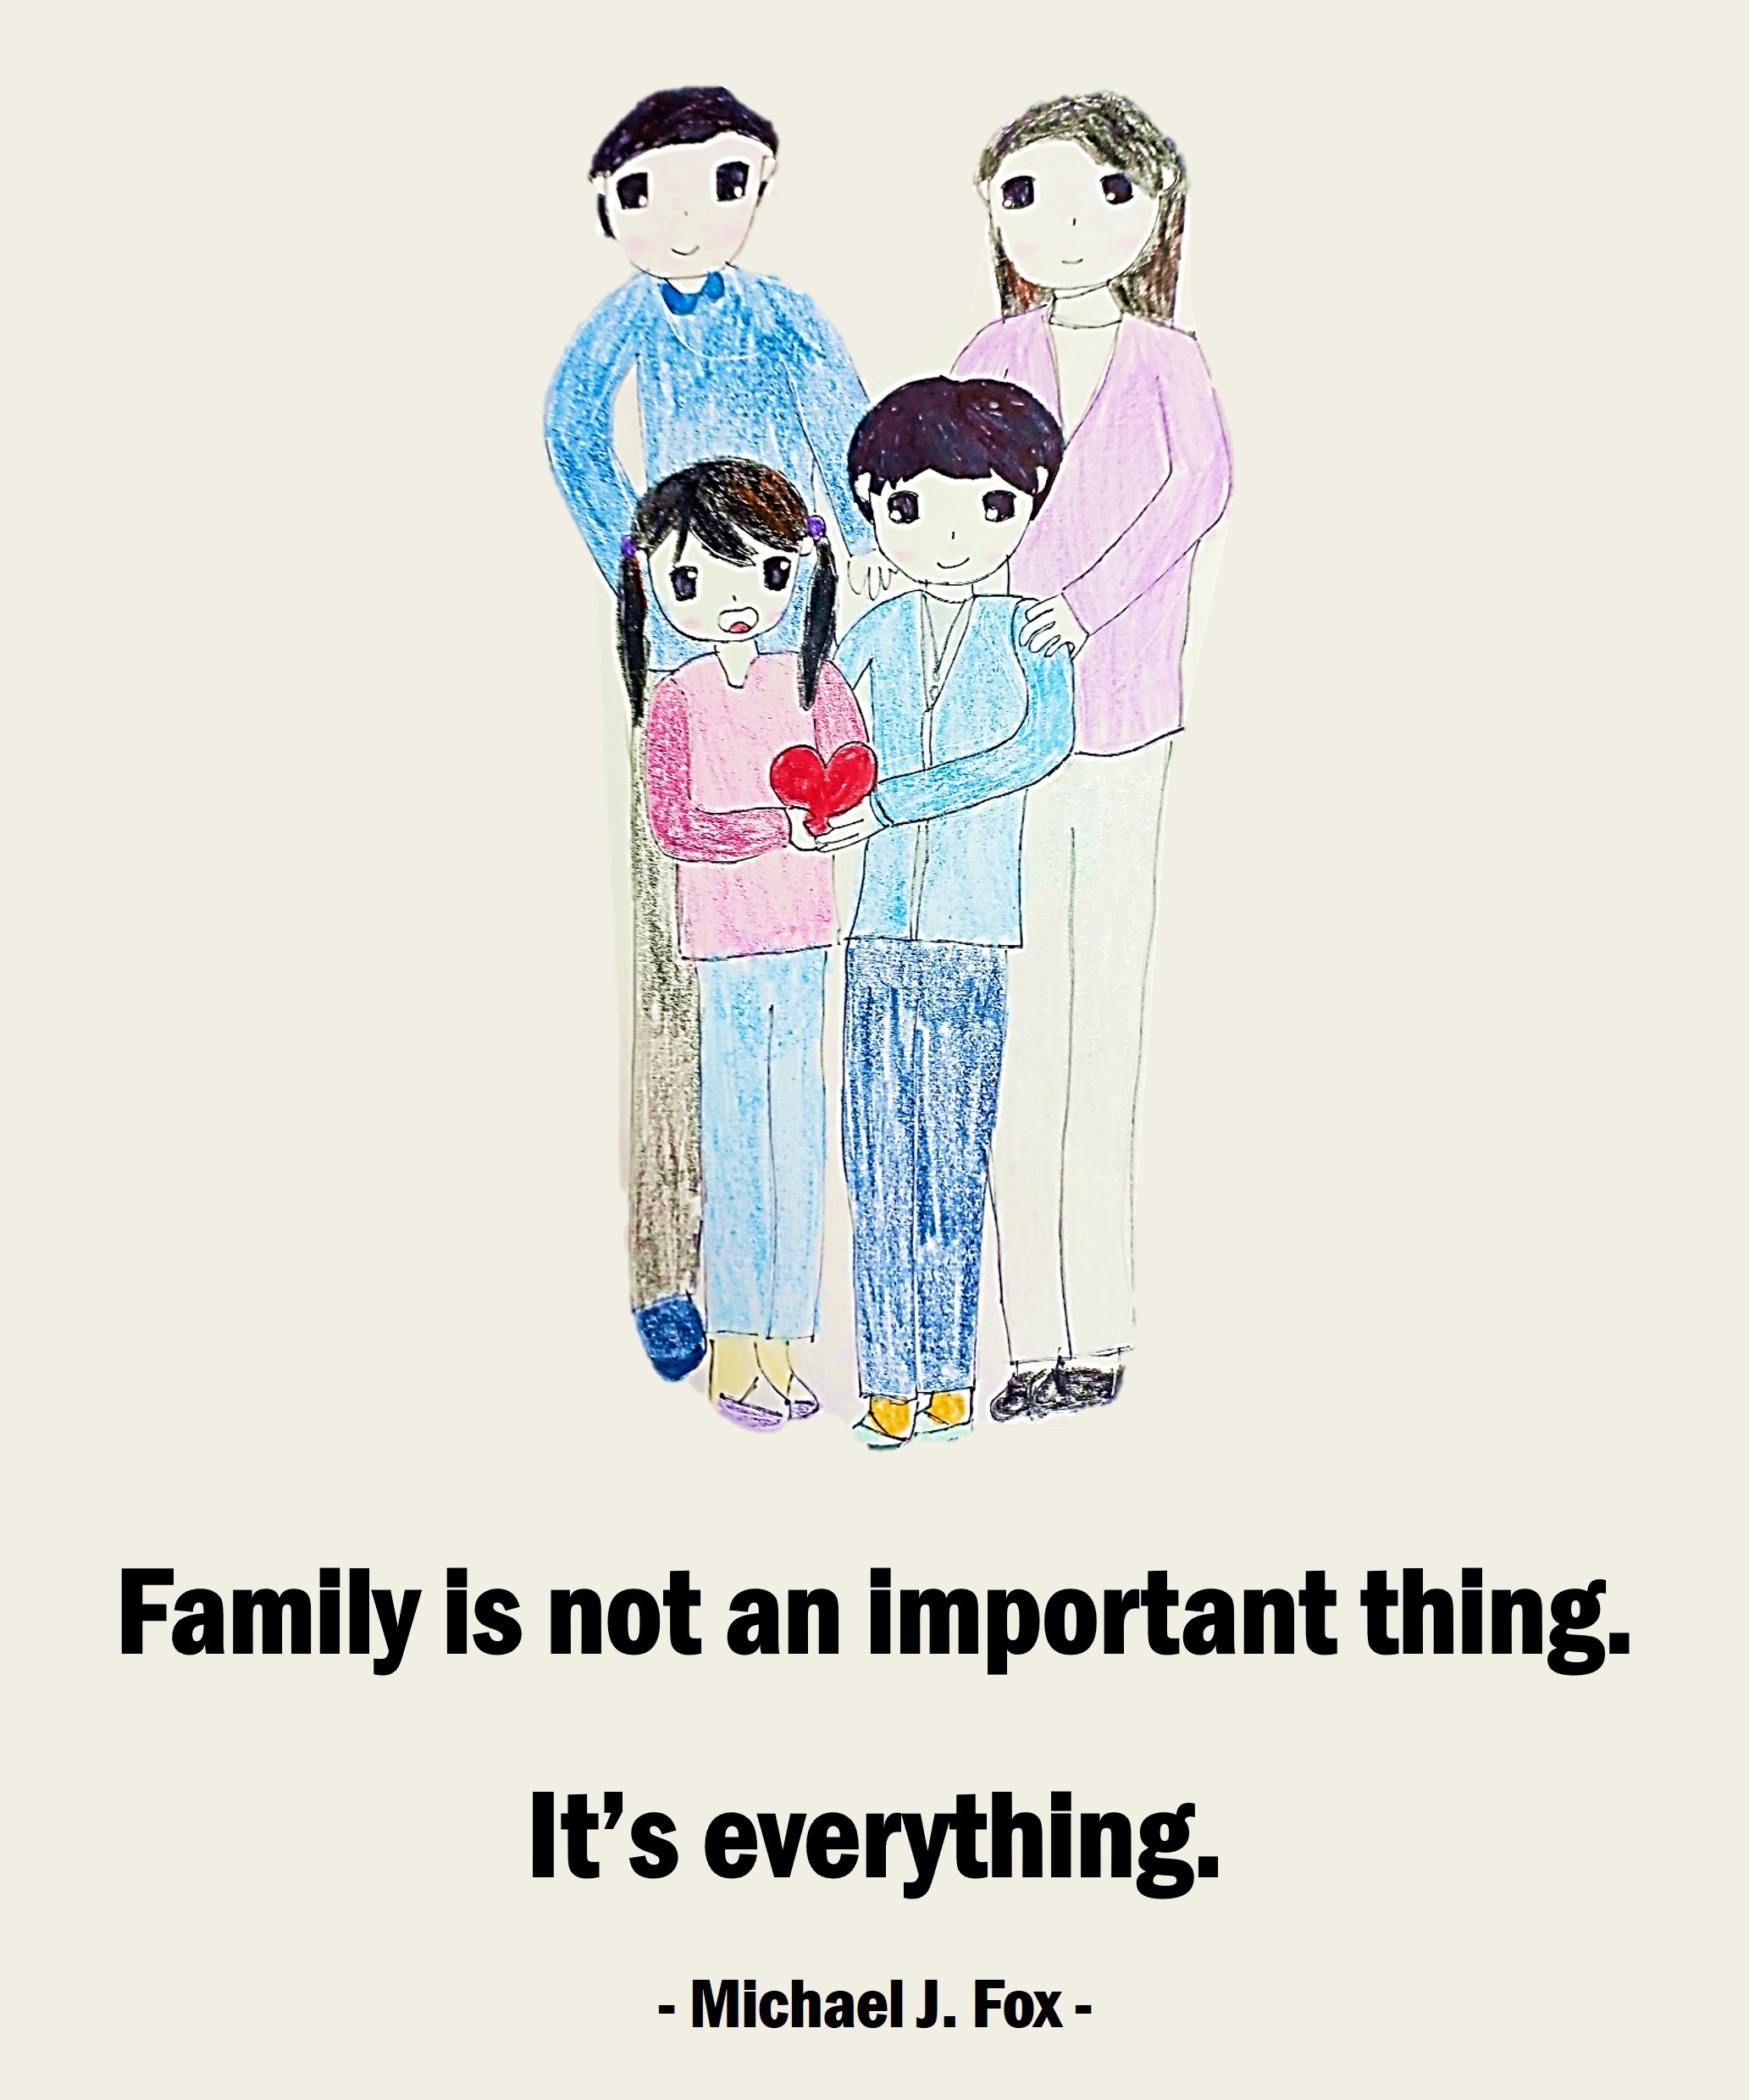 Family is not an important thing. It&rsquo;s everything. 
- Michael J. Fox -